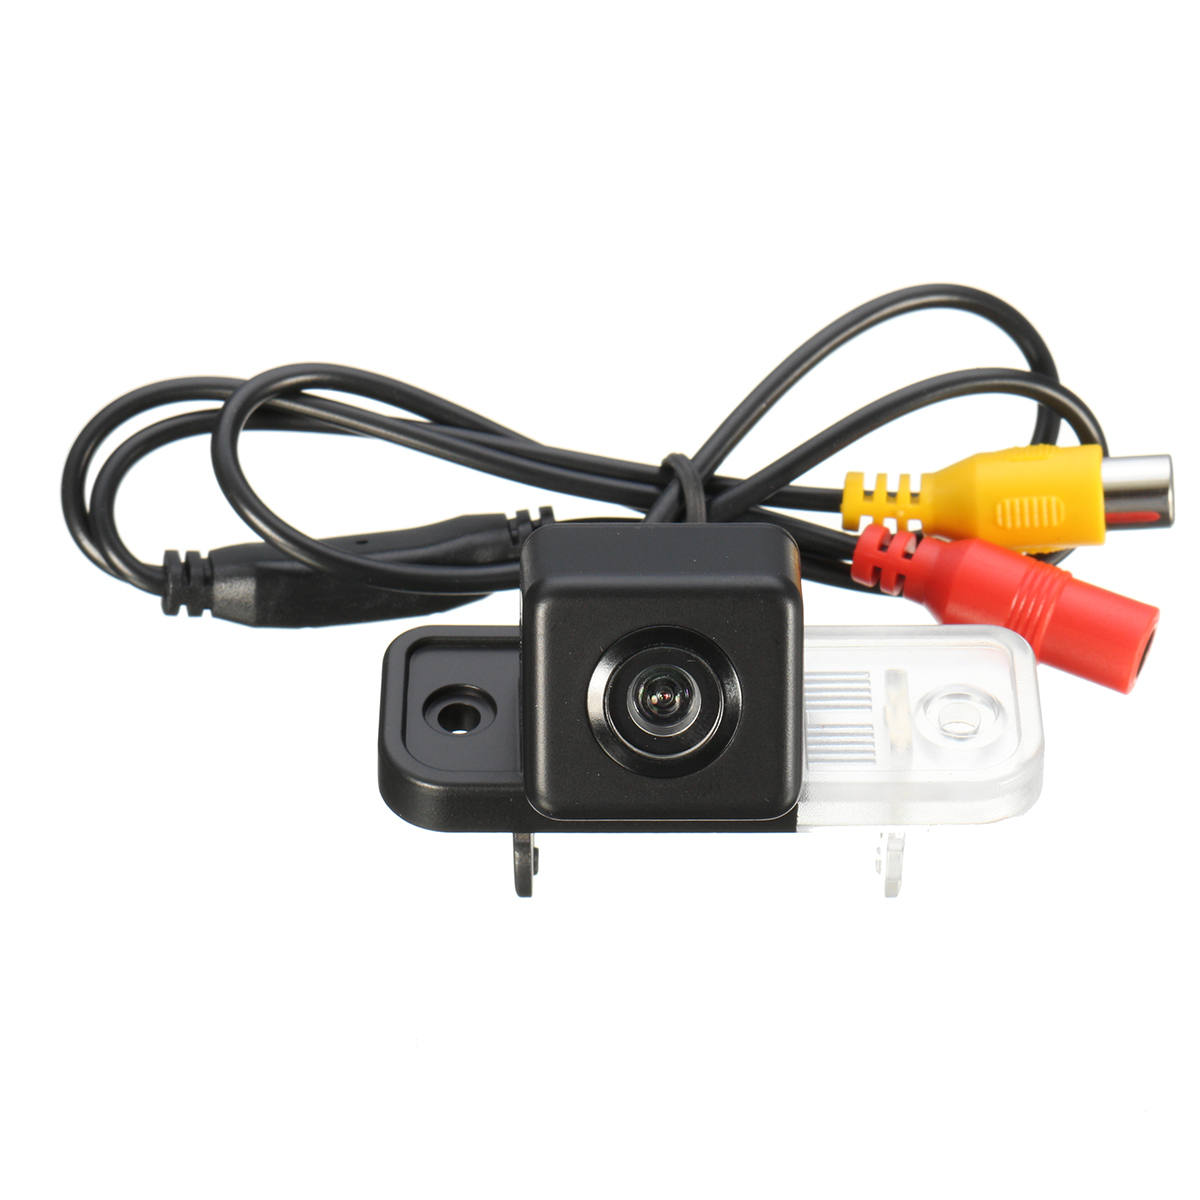 Car CCD Rear View Camera For Mercedes Benz C - Class W203 W211 CLS W219 1